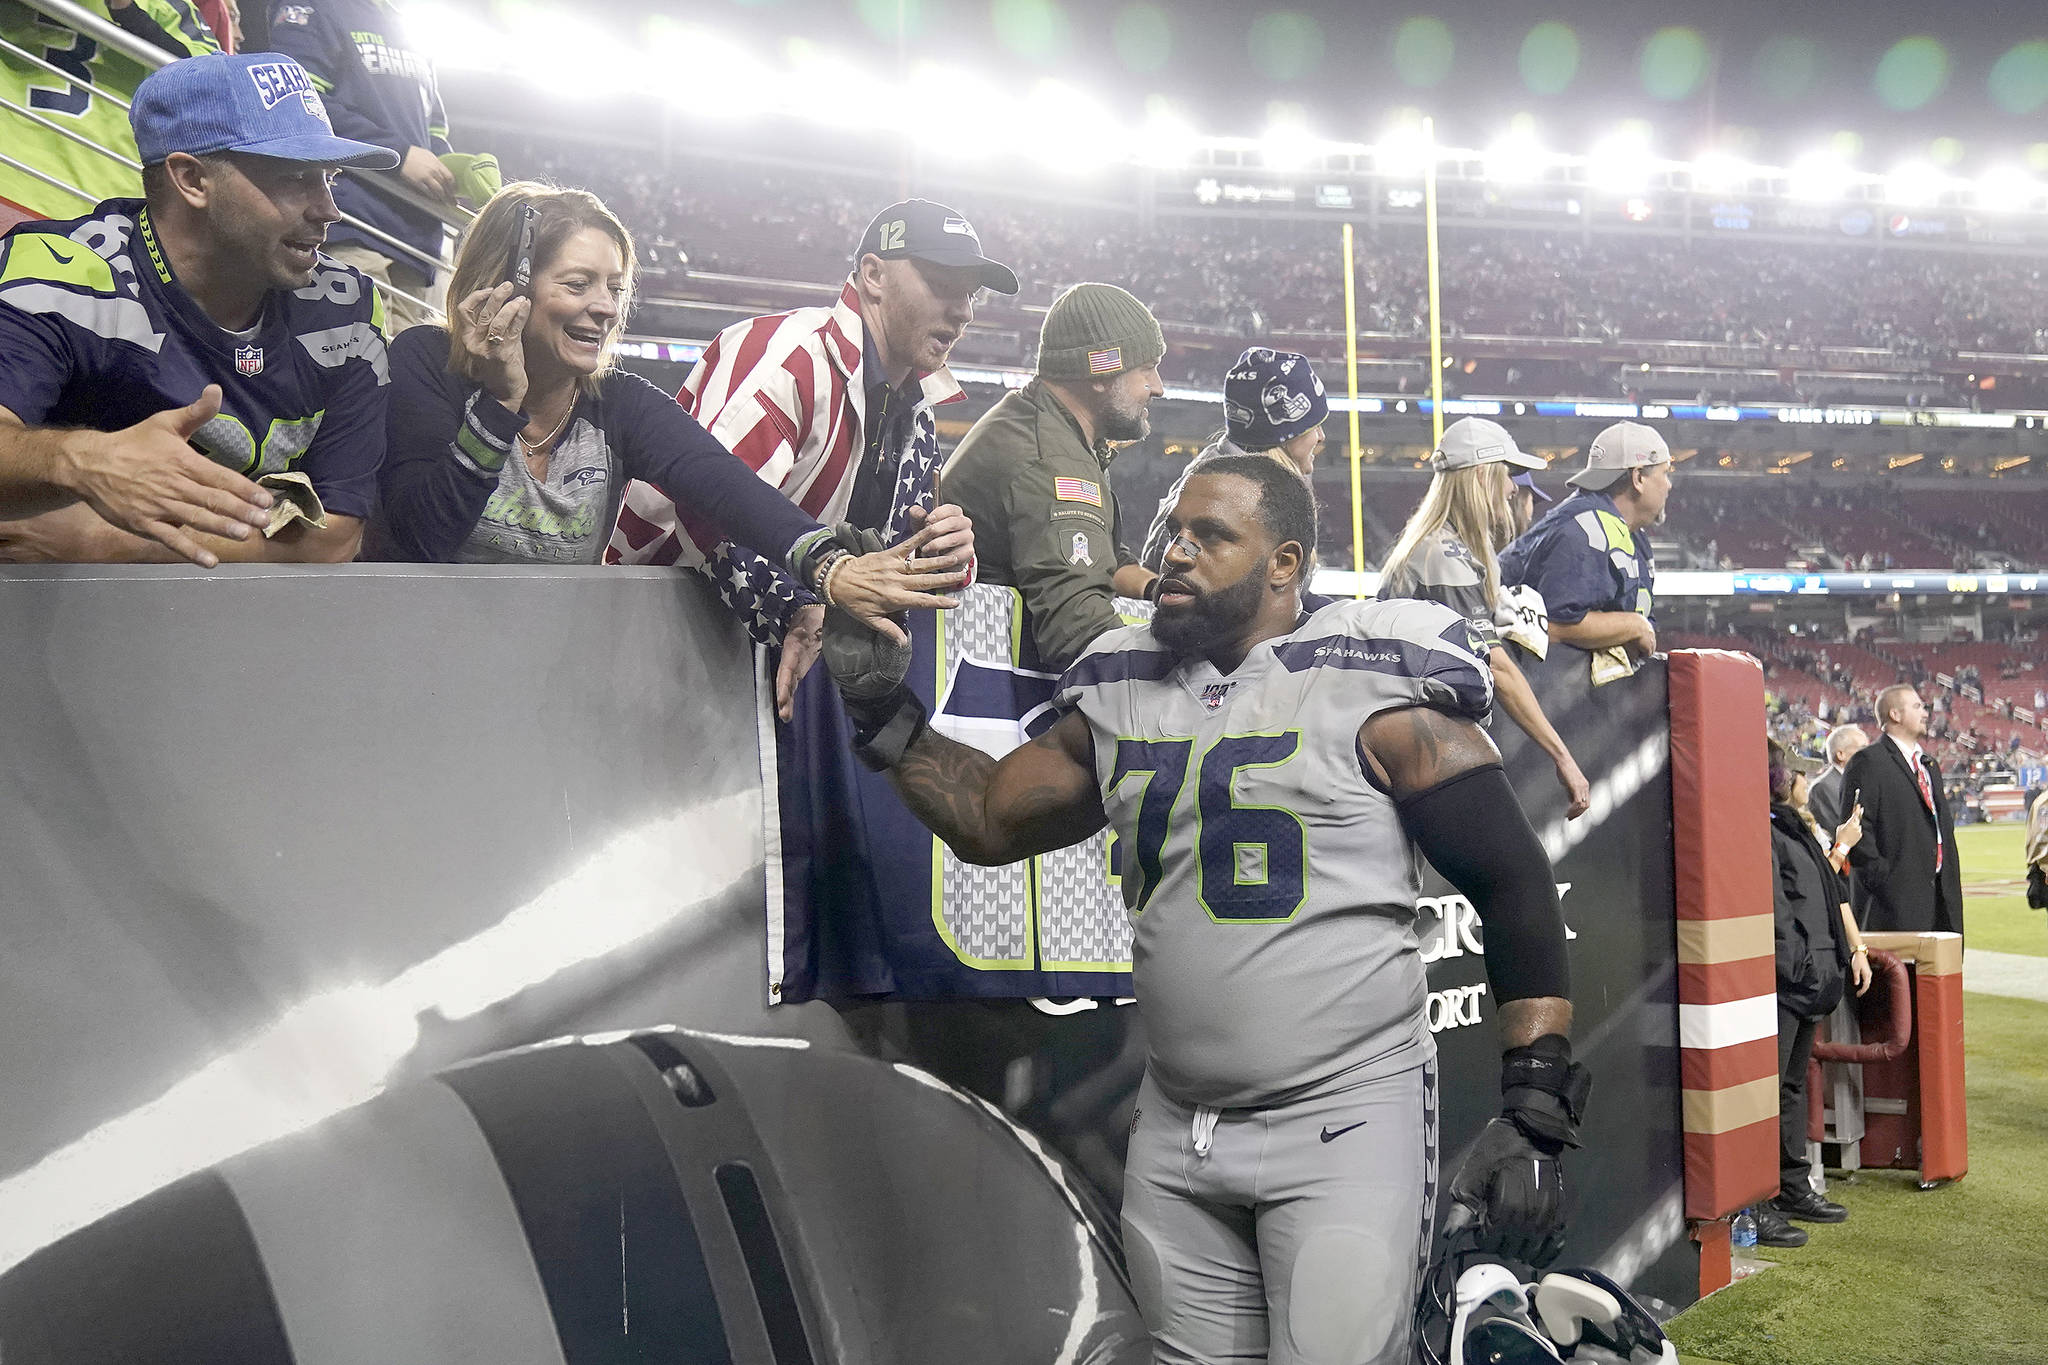 Seattle lineman Duane Brown greets fans after the Seahawks defeated San Francisco last month to improve to 6-0 on the road. (The Associated Press)